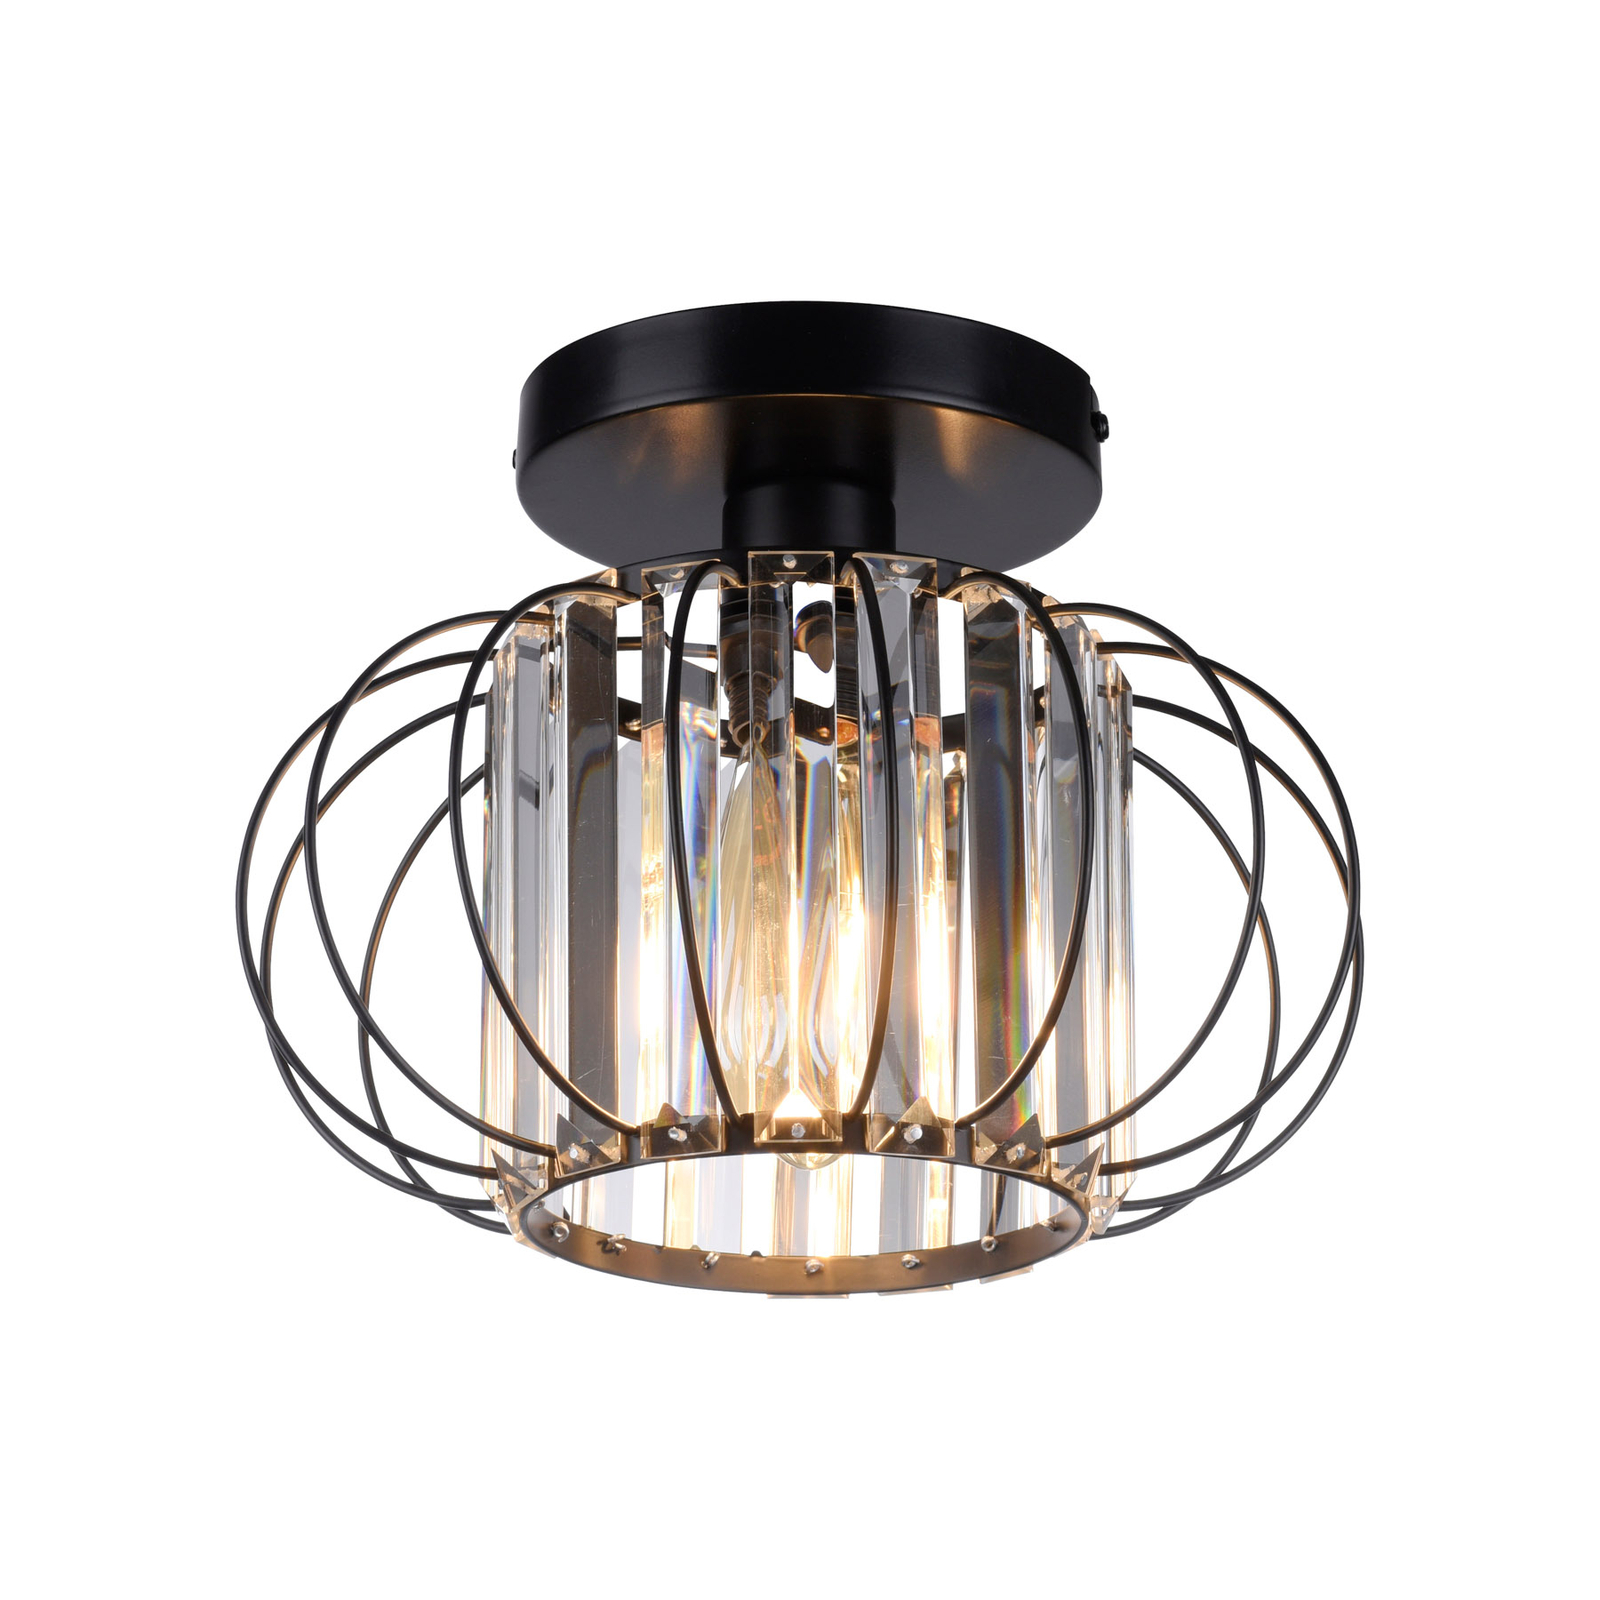 Scula ceiling light with cage shade, black